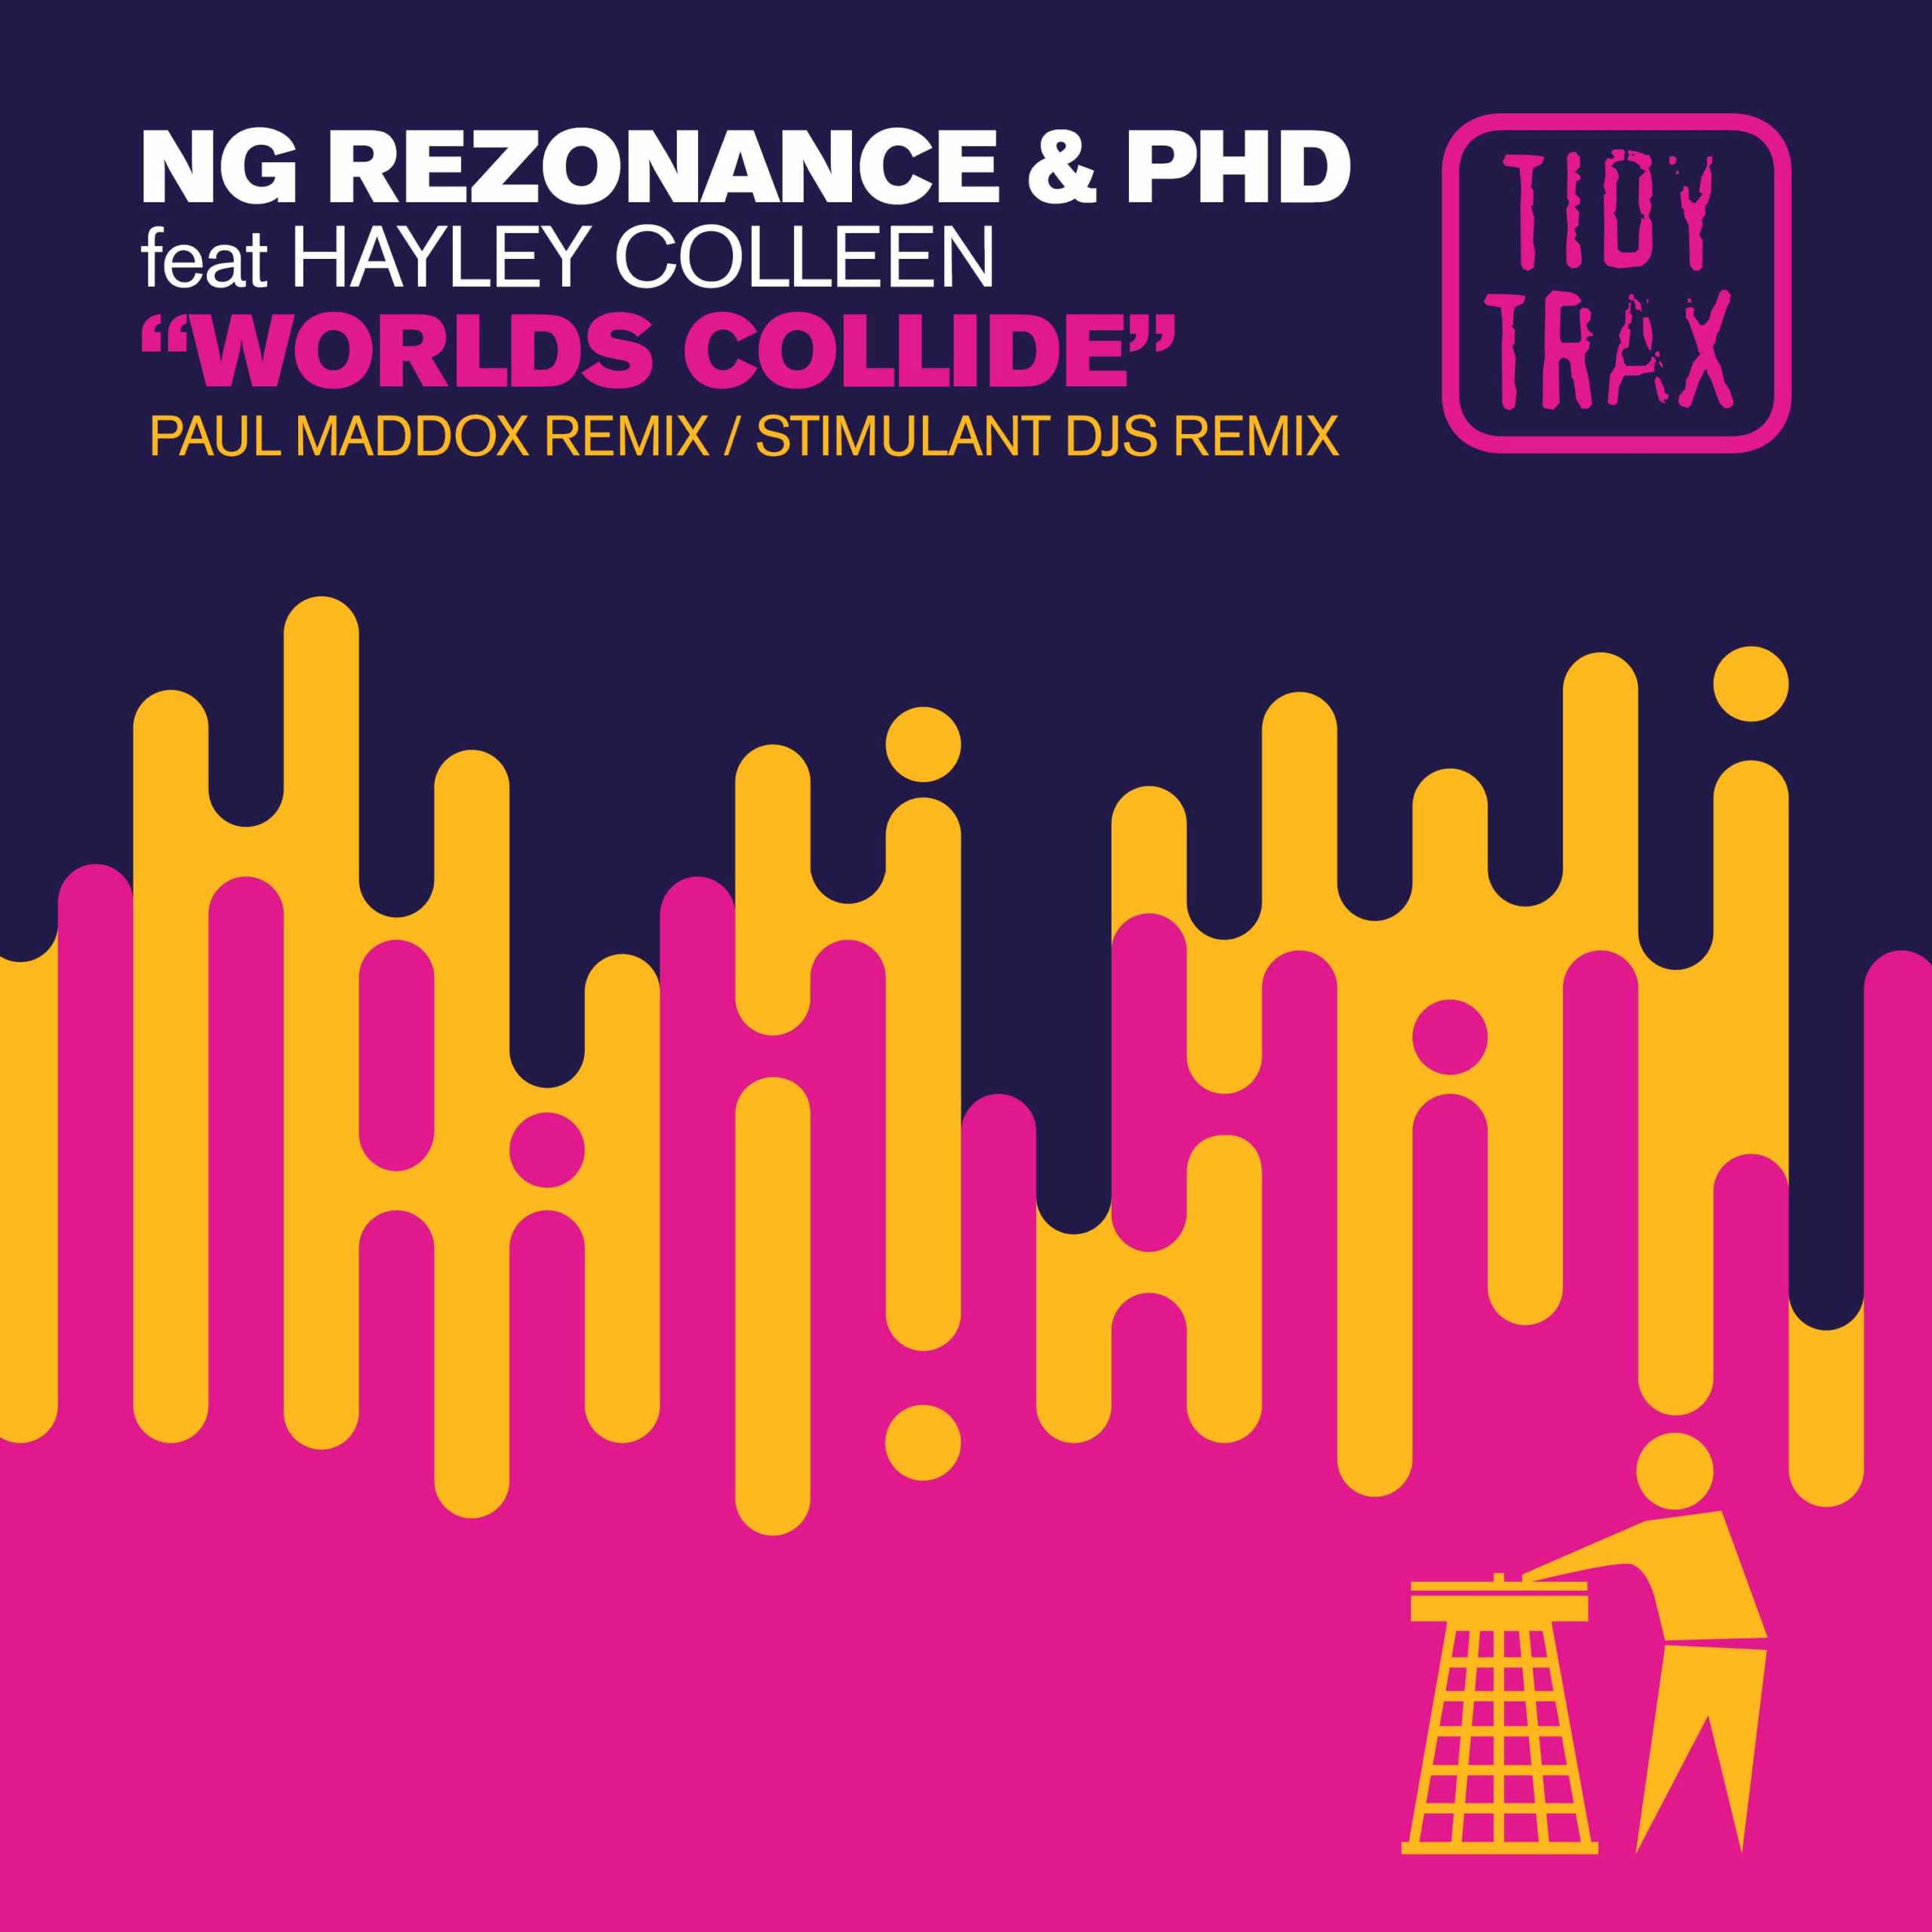 NG Rezonance & PHD feat Hayley Colleen - Worlds Collide (Hard House Remixes)